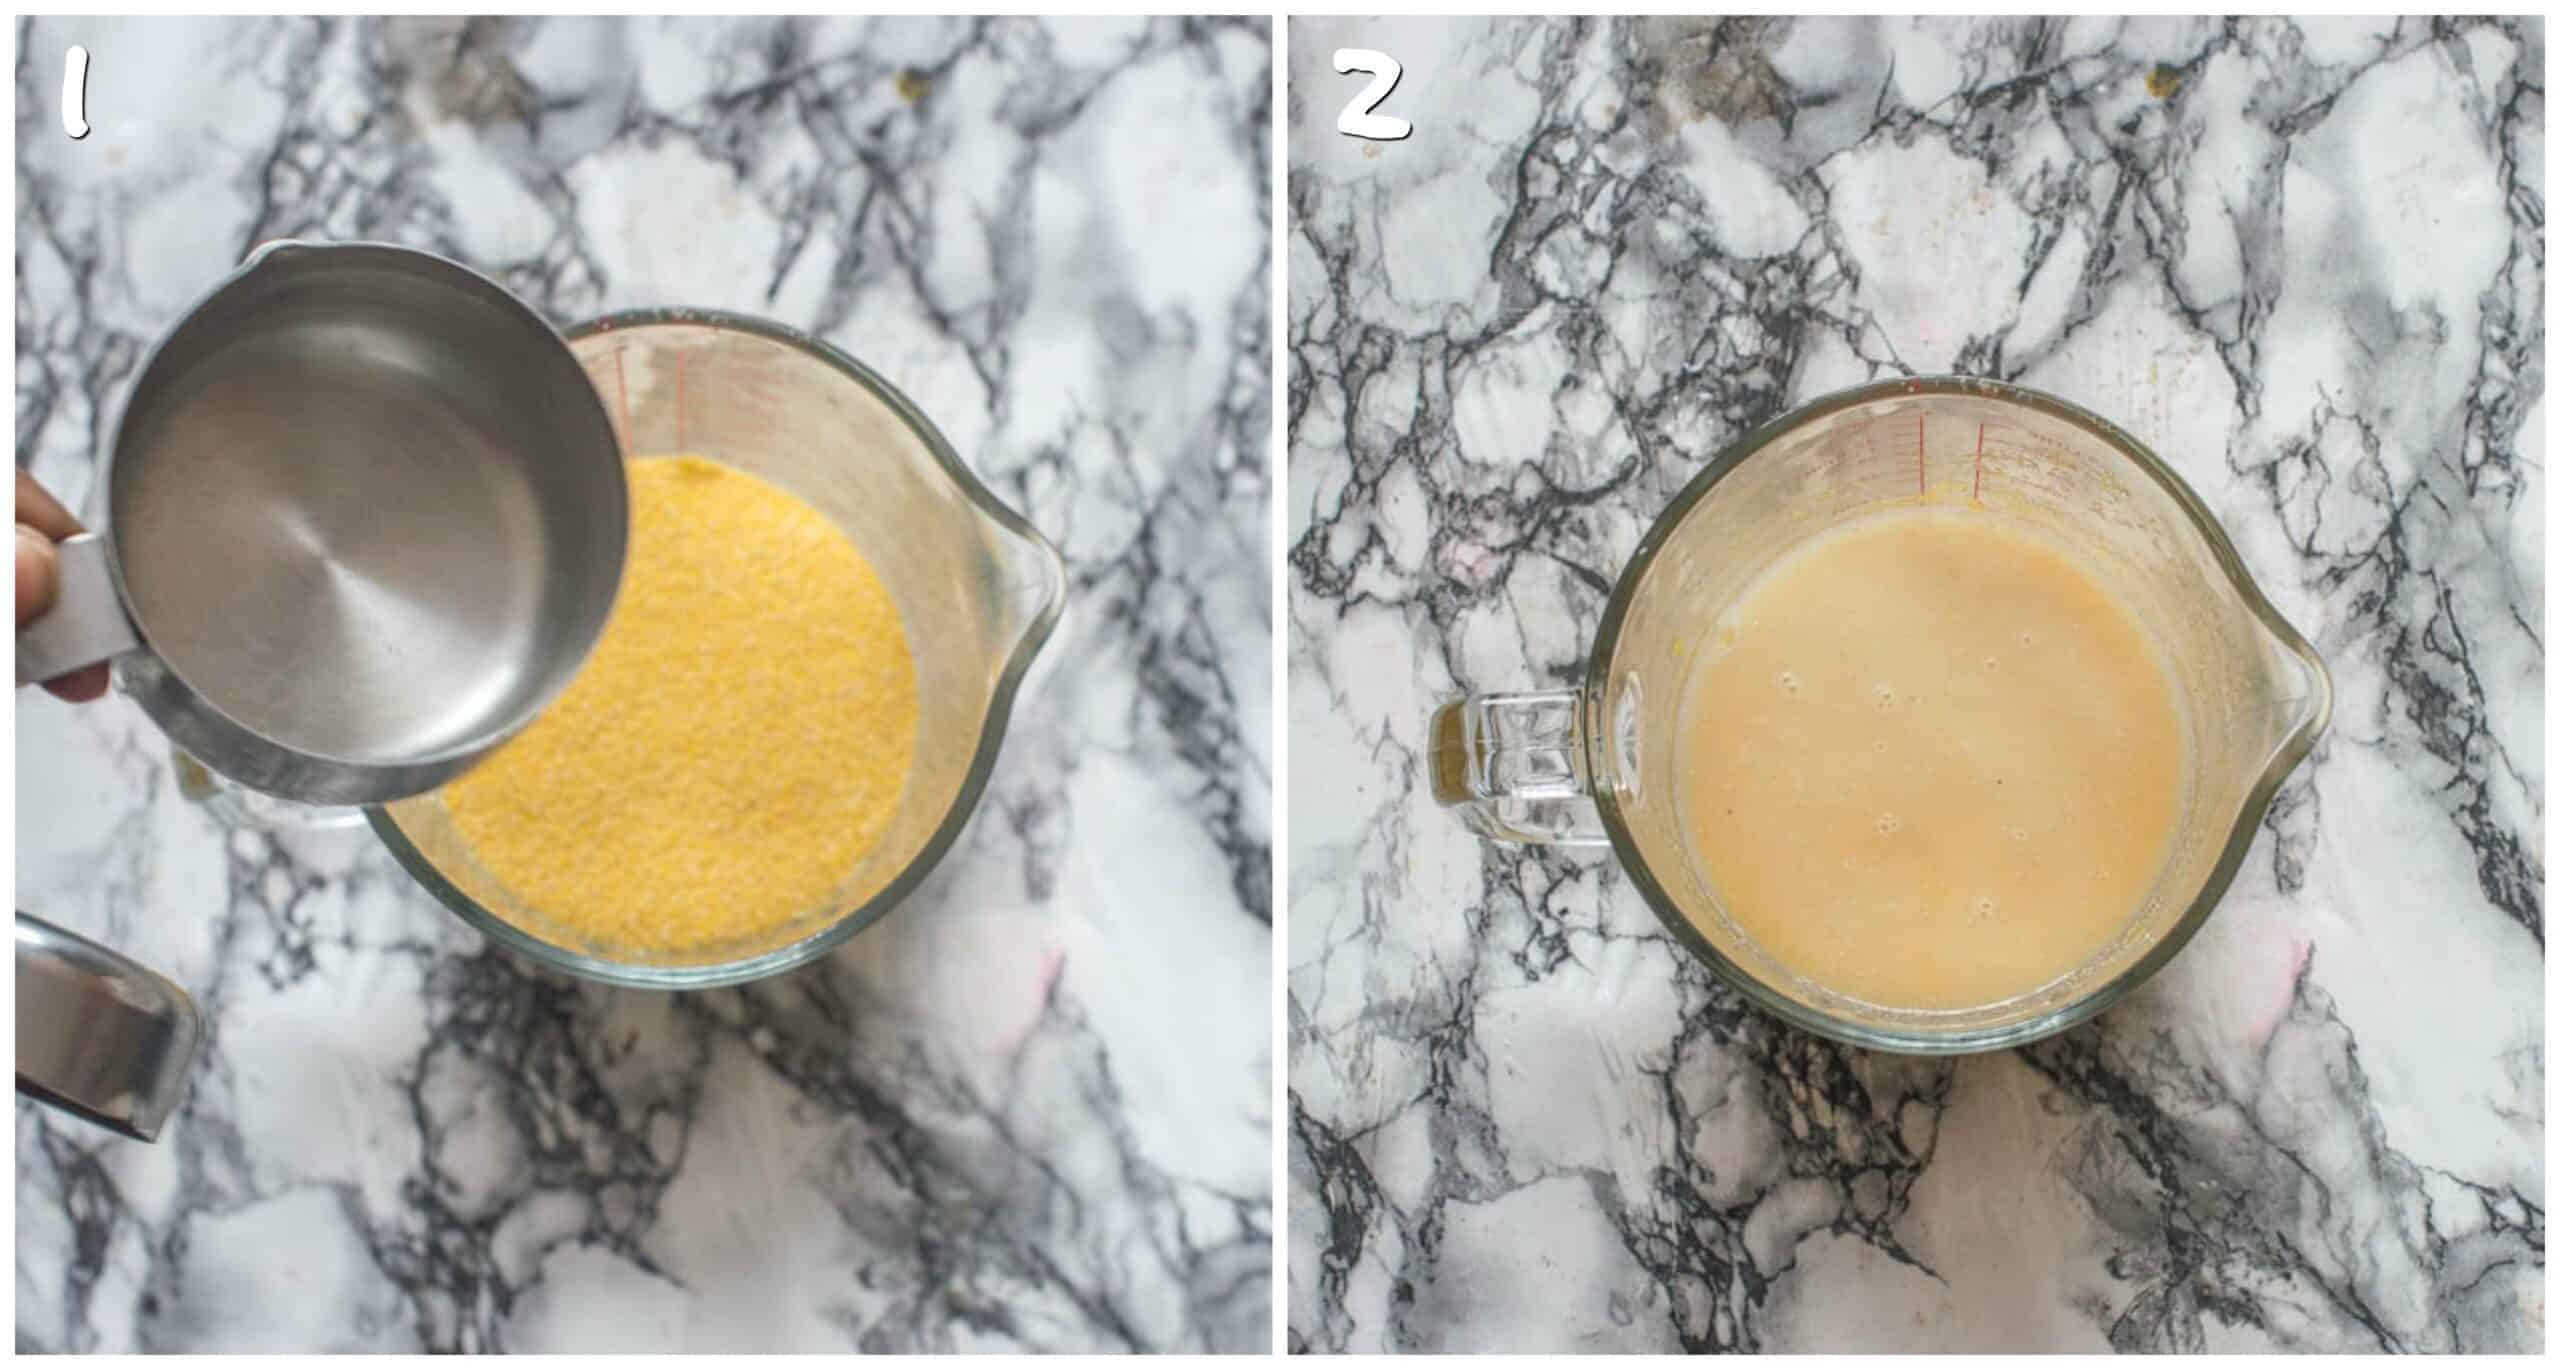 Steps 1-2 mixing the cornmeal with water